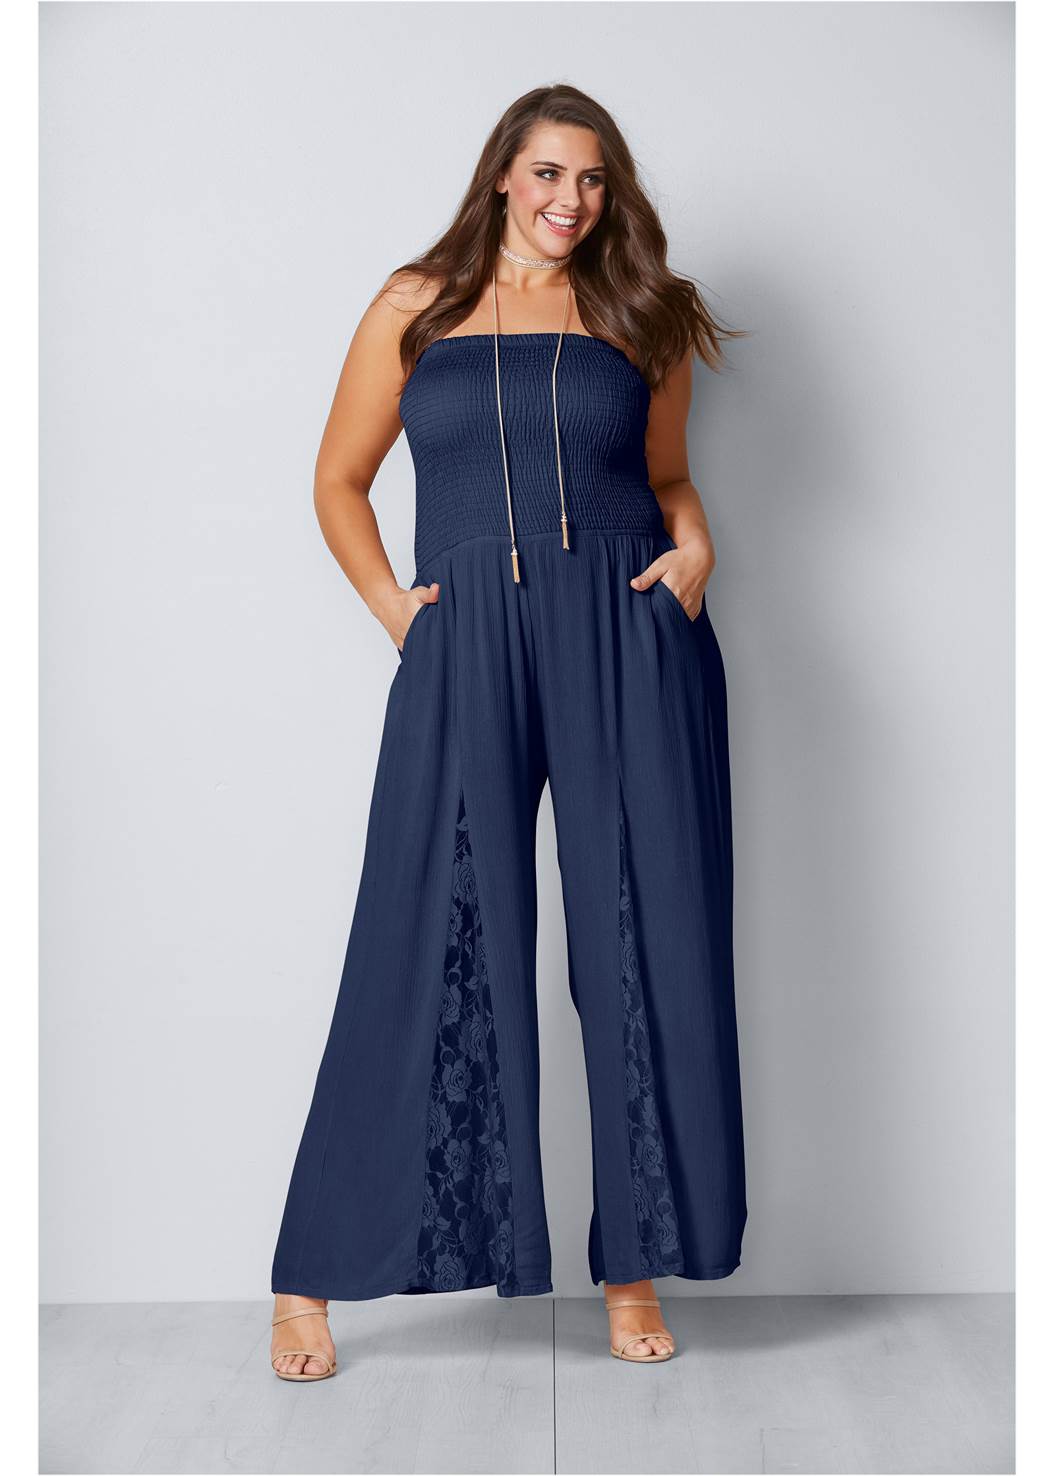 SLEEVELESS SMOCKED JUMPSUIT WITH LACE DETAIL in Navy | VENUS